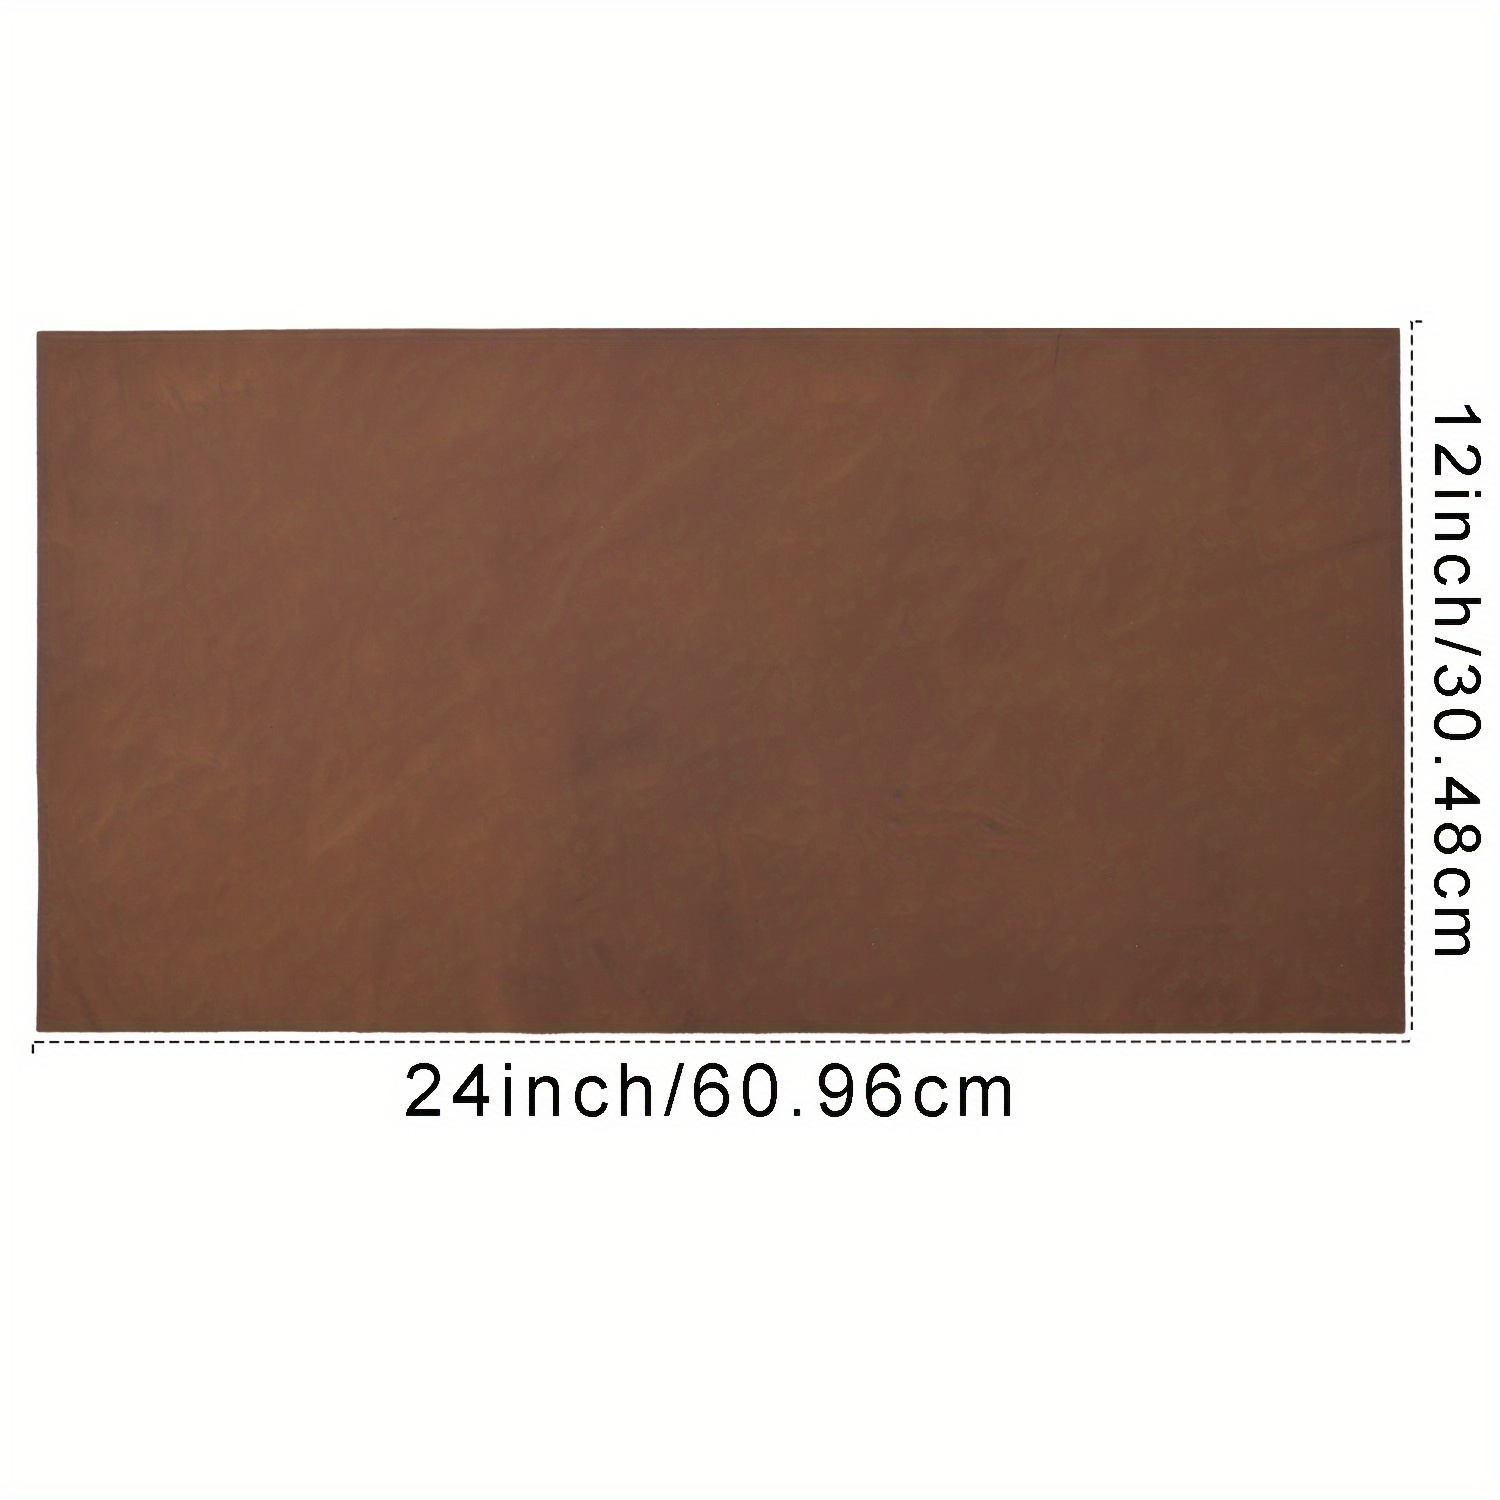  Genique Tooling Leather Sheets For Crafts 2mm Thick Full  Grain Leather Pieces For Crafting, Tooling, Sewing, Carving, DIY Projects,  Jewelry Making